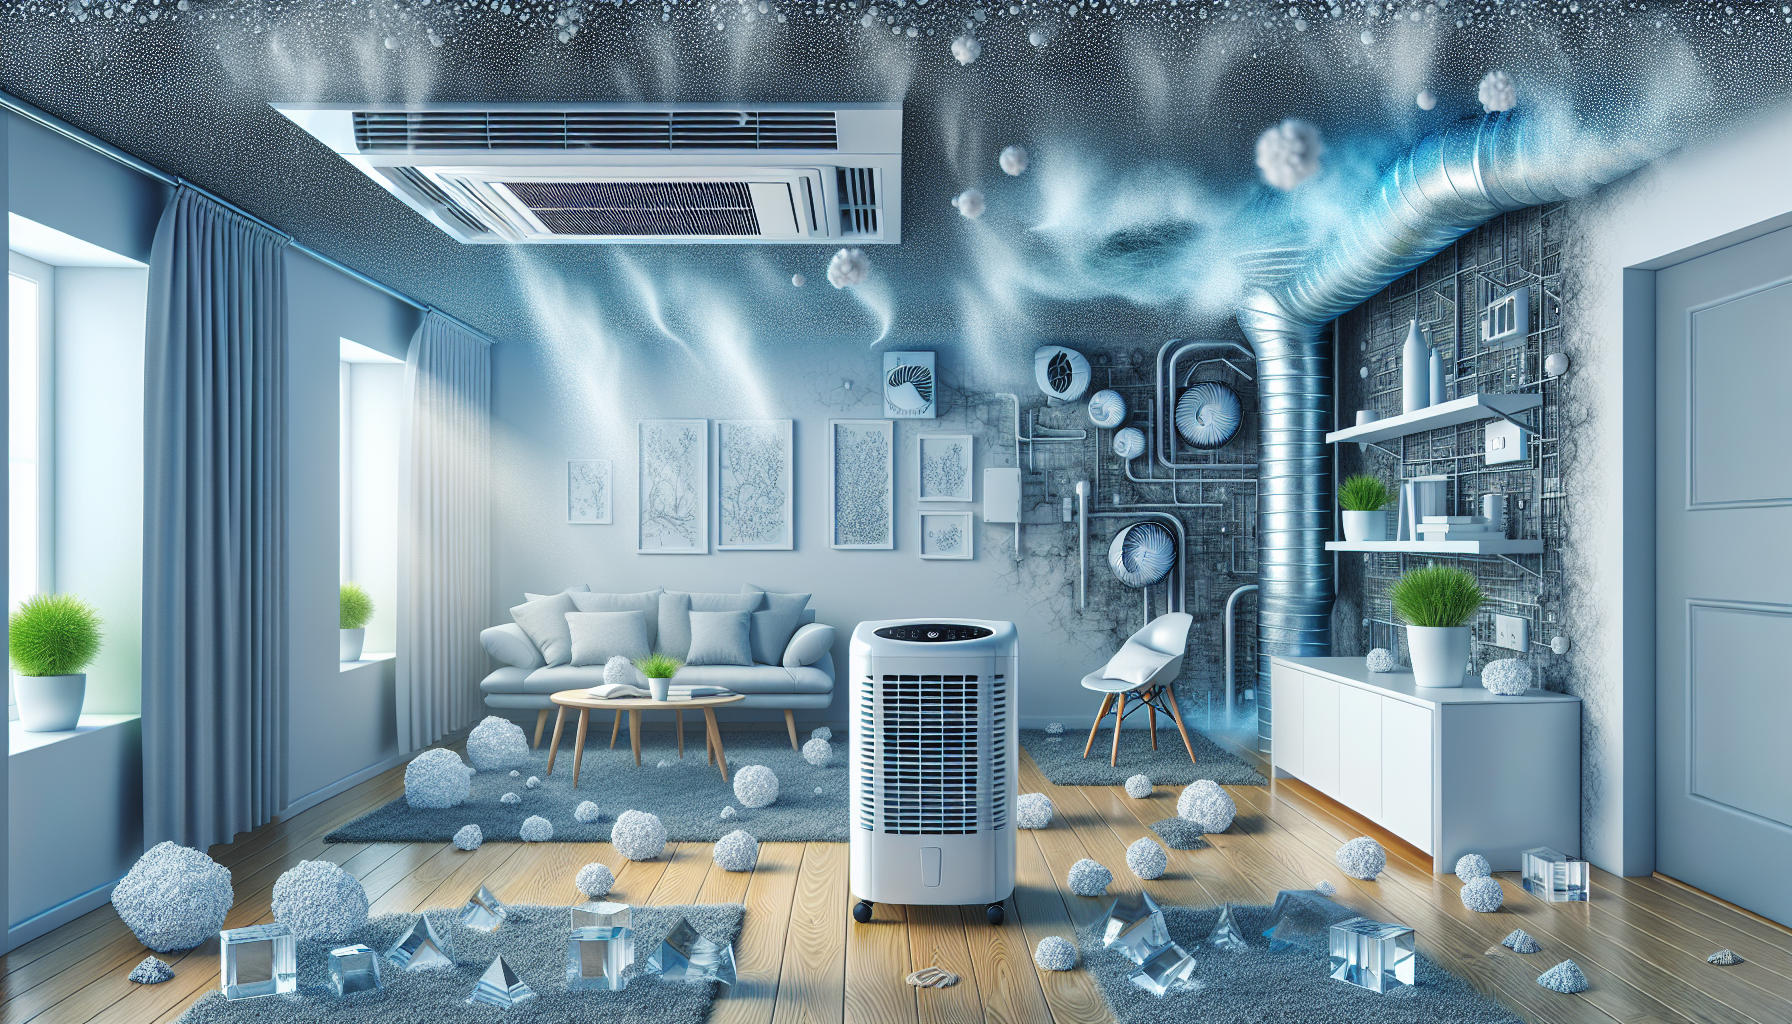 Controlling indoor humidity levels